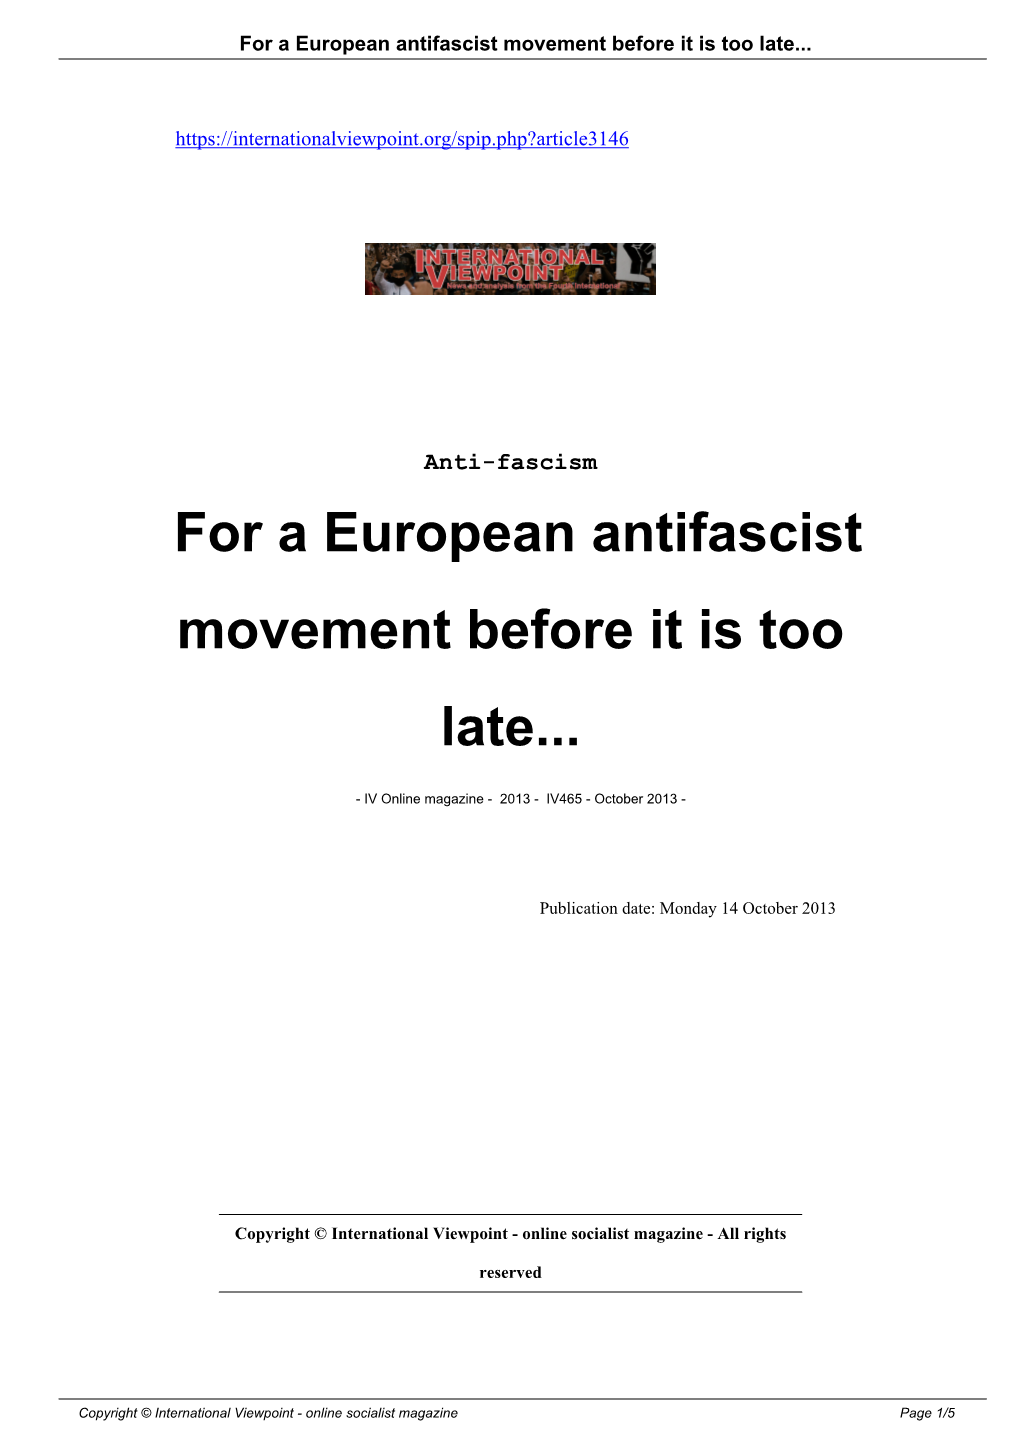 For a European Antifascist Movement Before It Is Too Late